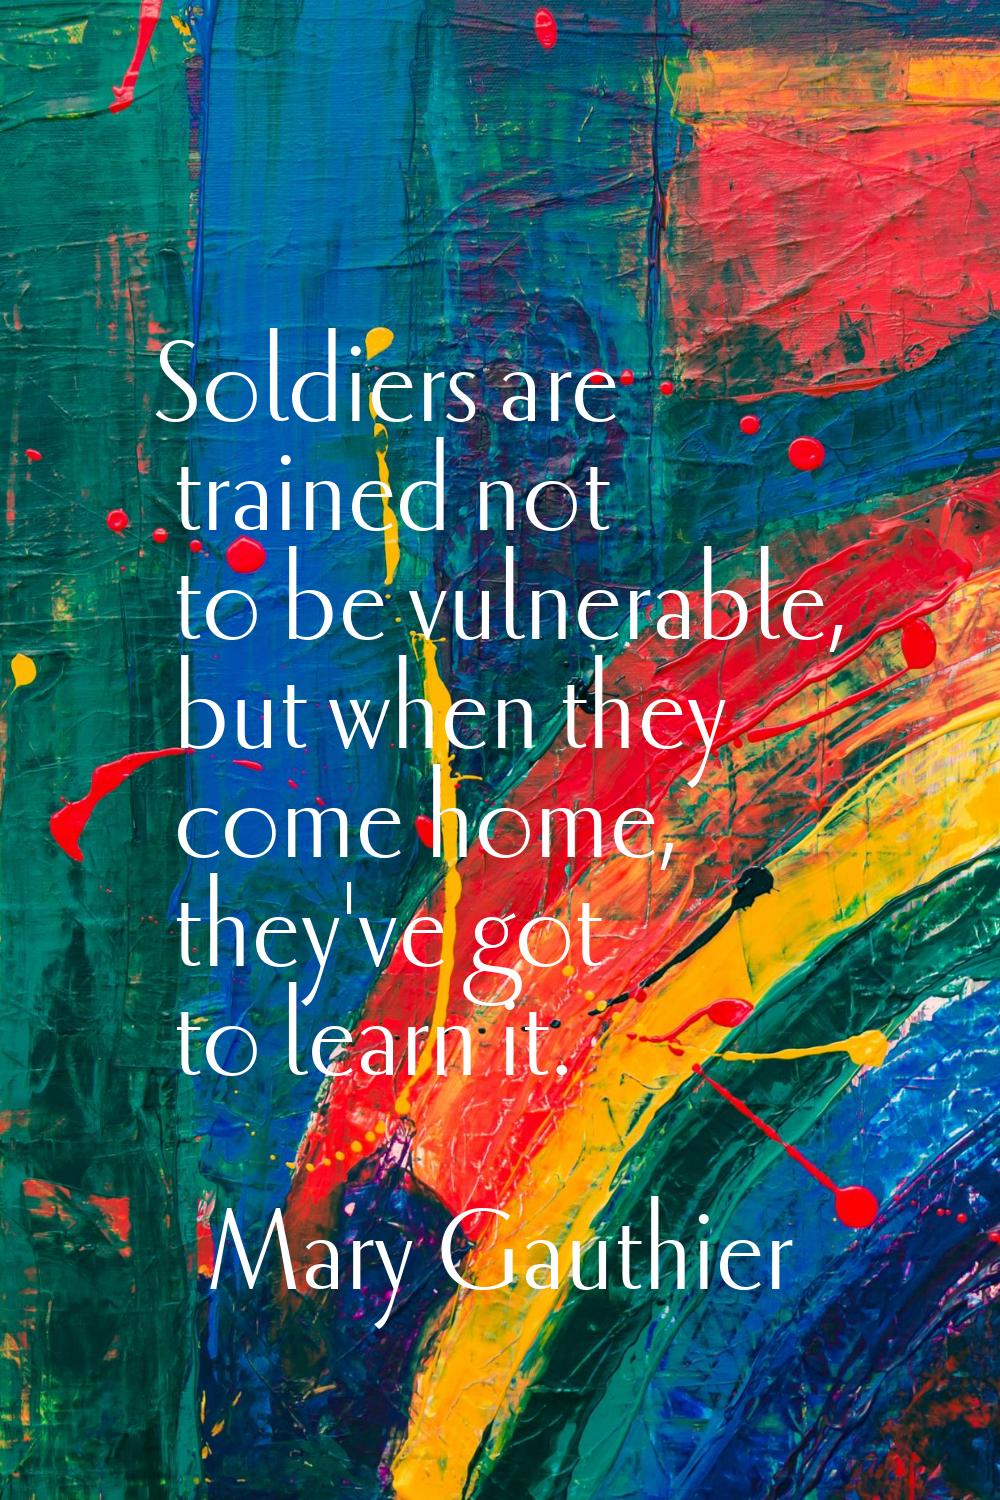 Soldiers are trained not to be vulnerable, but when they come home, they've got to learn it.